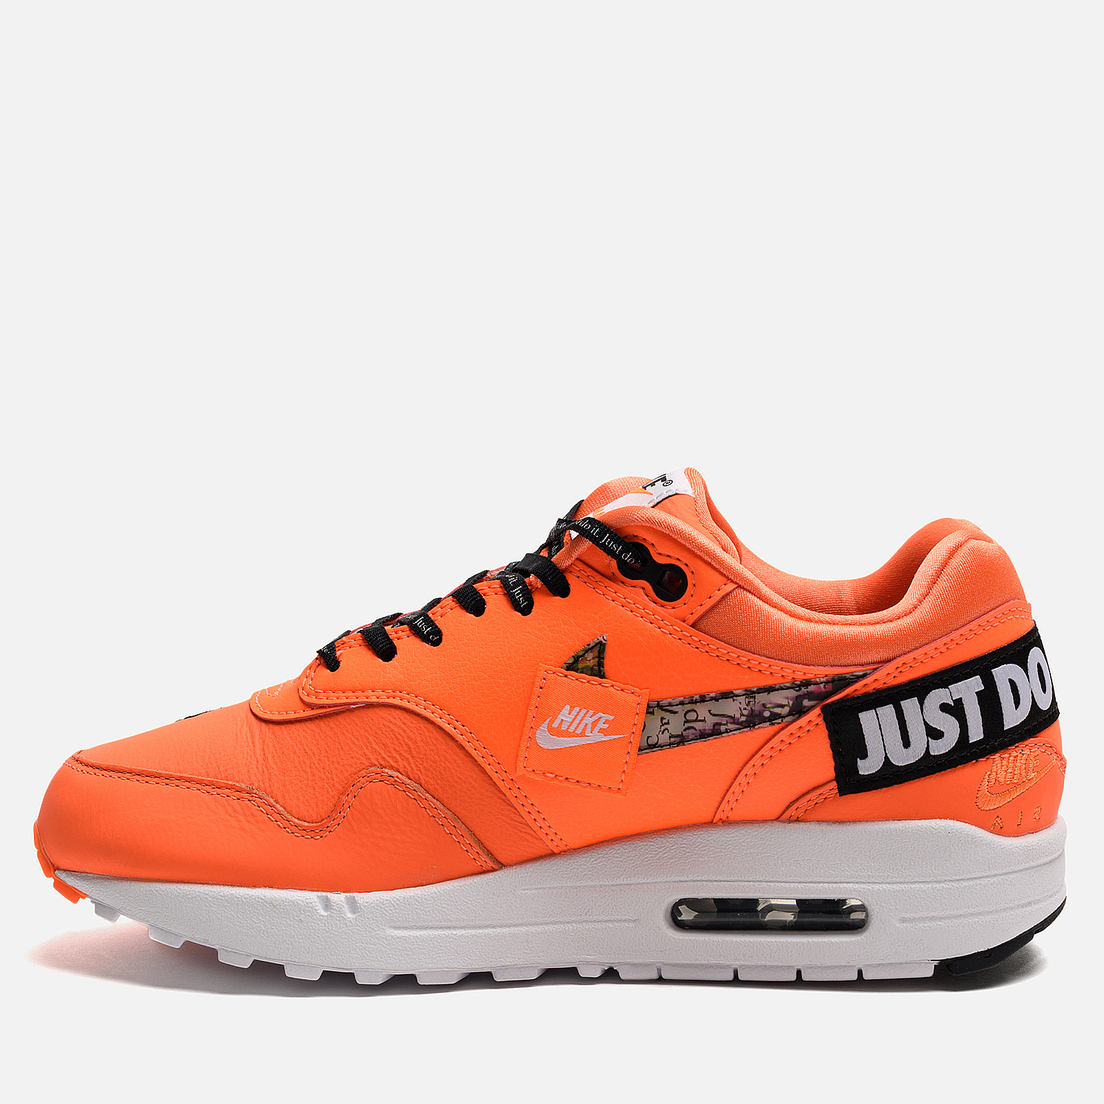 Nike Женские кроссовки Air Max 1 Lux Just Do It